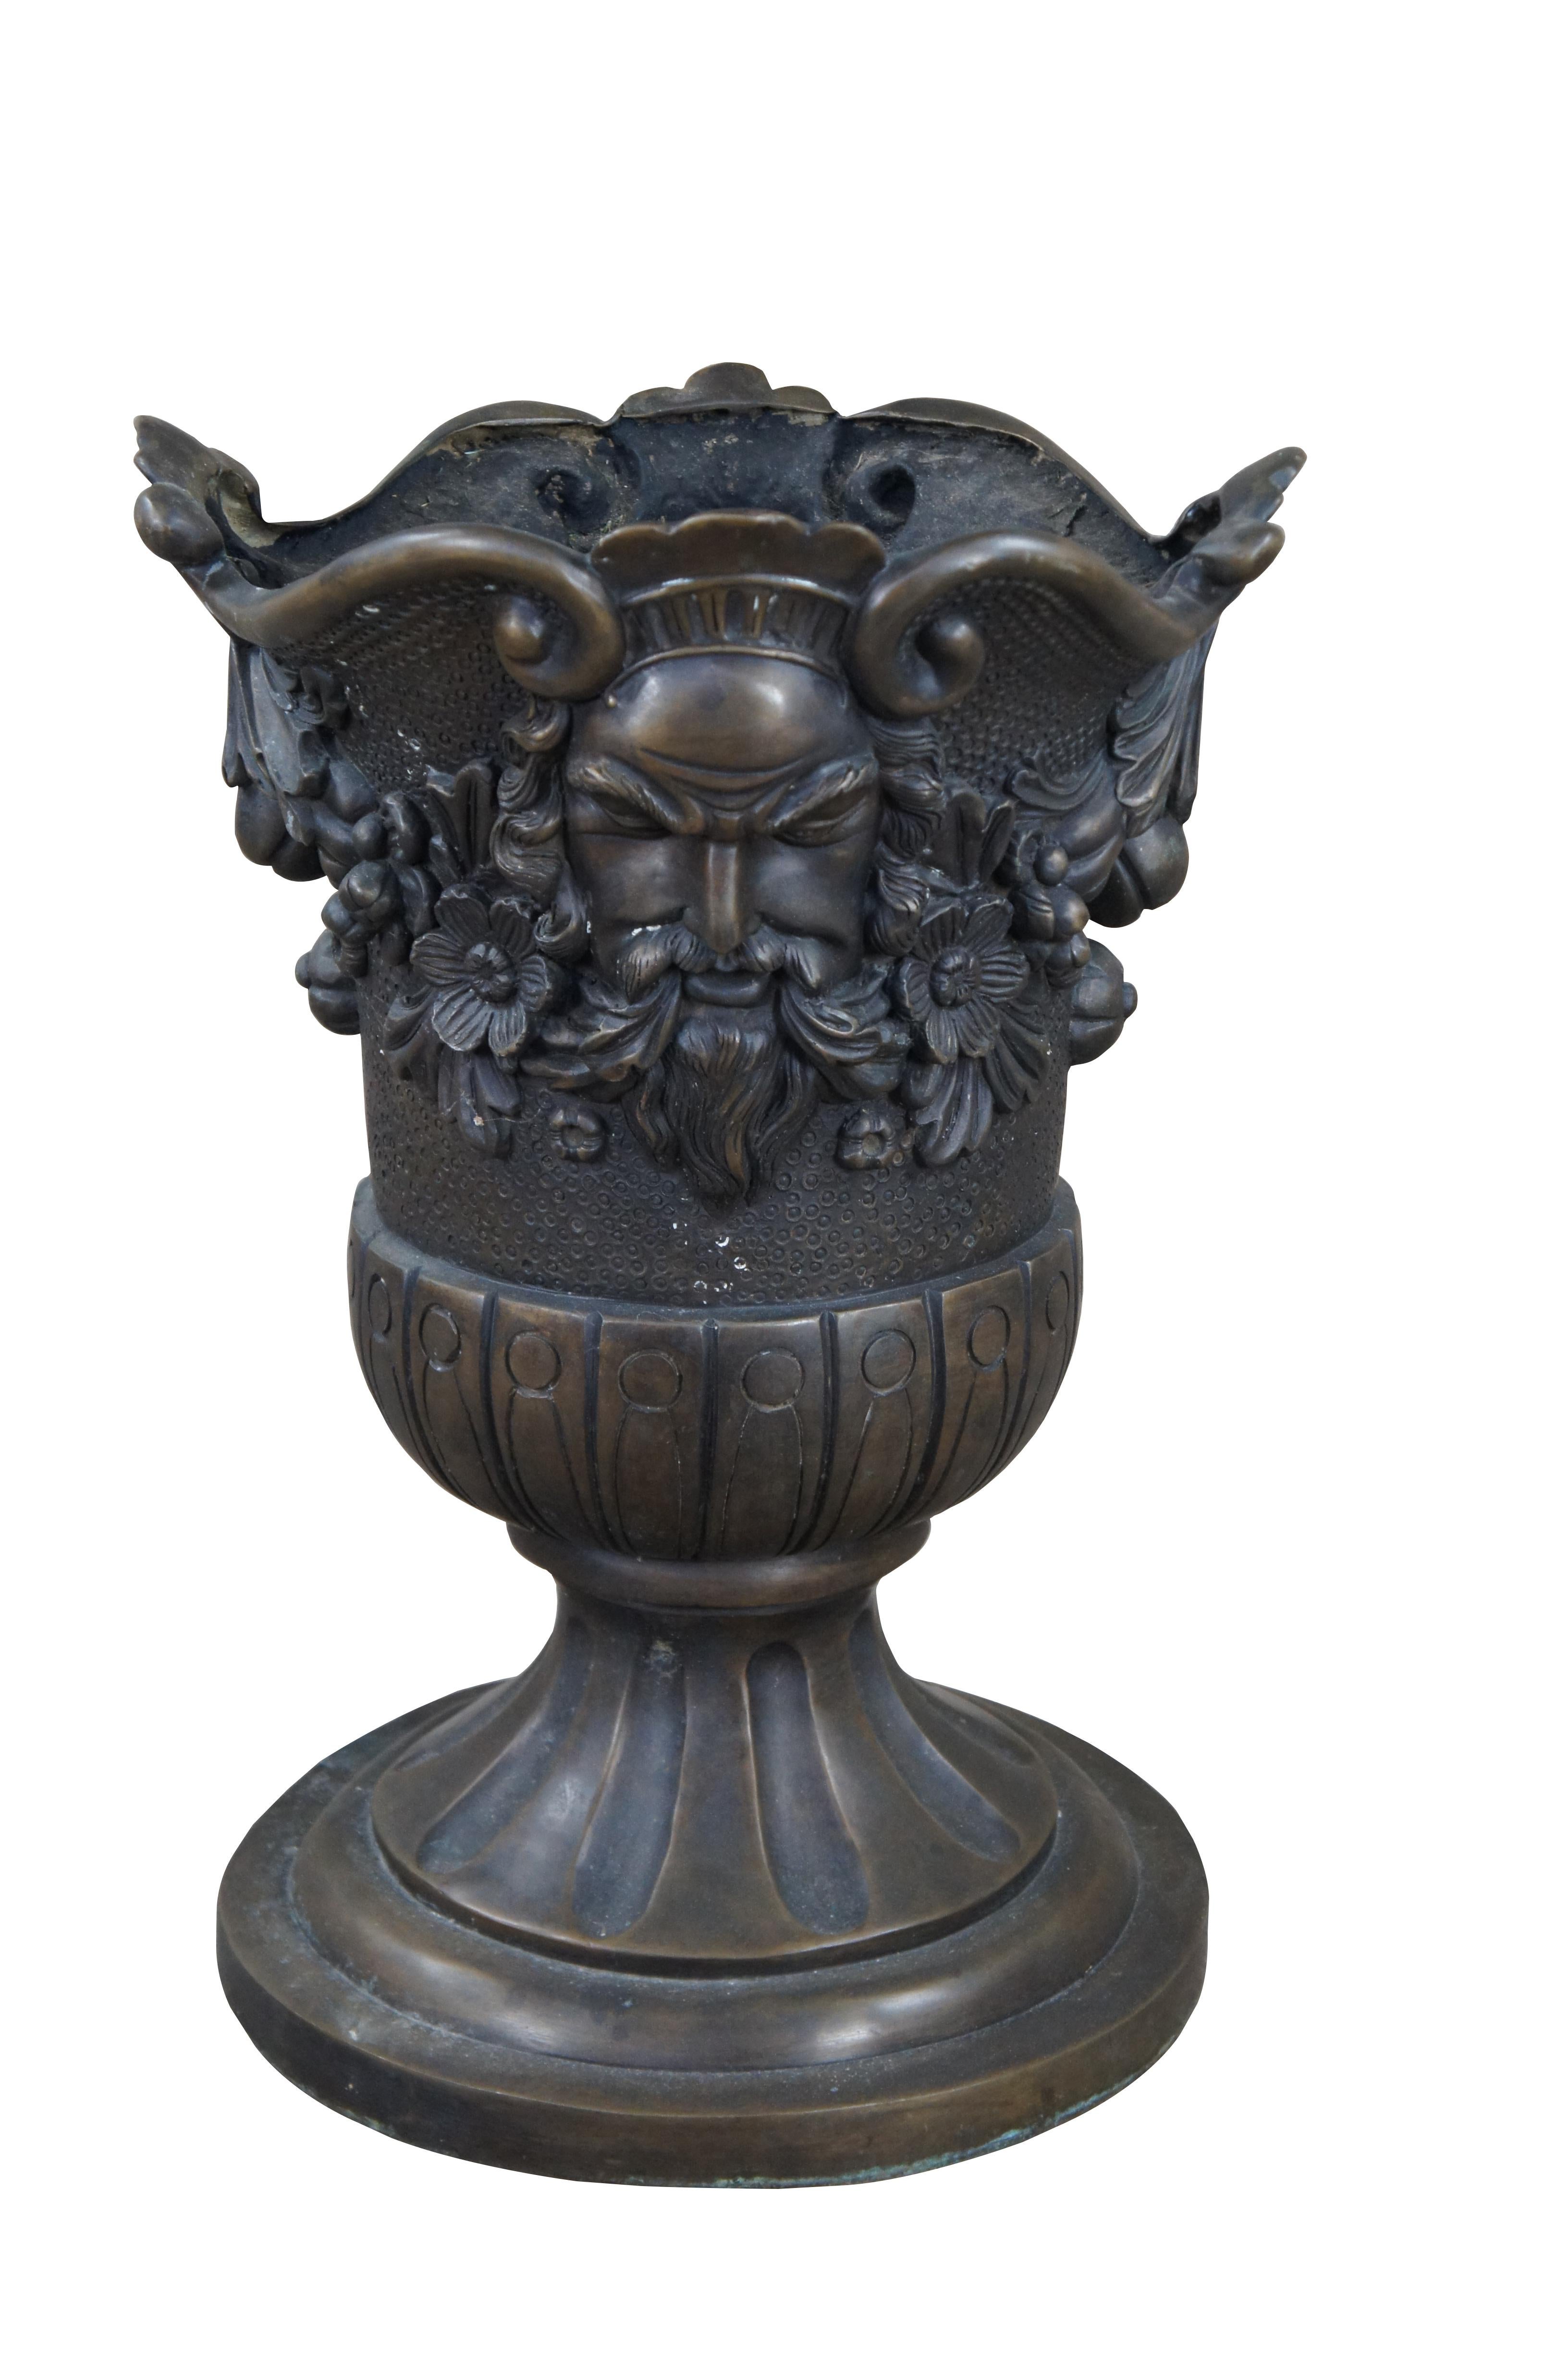 A beautiful figured bronze urn or planter. Features a traditional Grecian form with a lobed body and round fluted base. Decorated with a low relief depiction of Zeus flanking opposite sides amongst foliate and floral detail. Great for display around